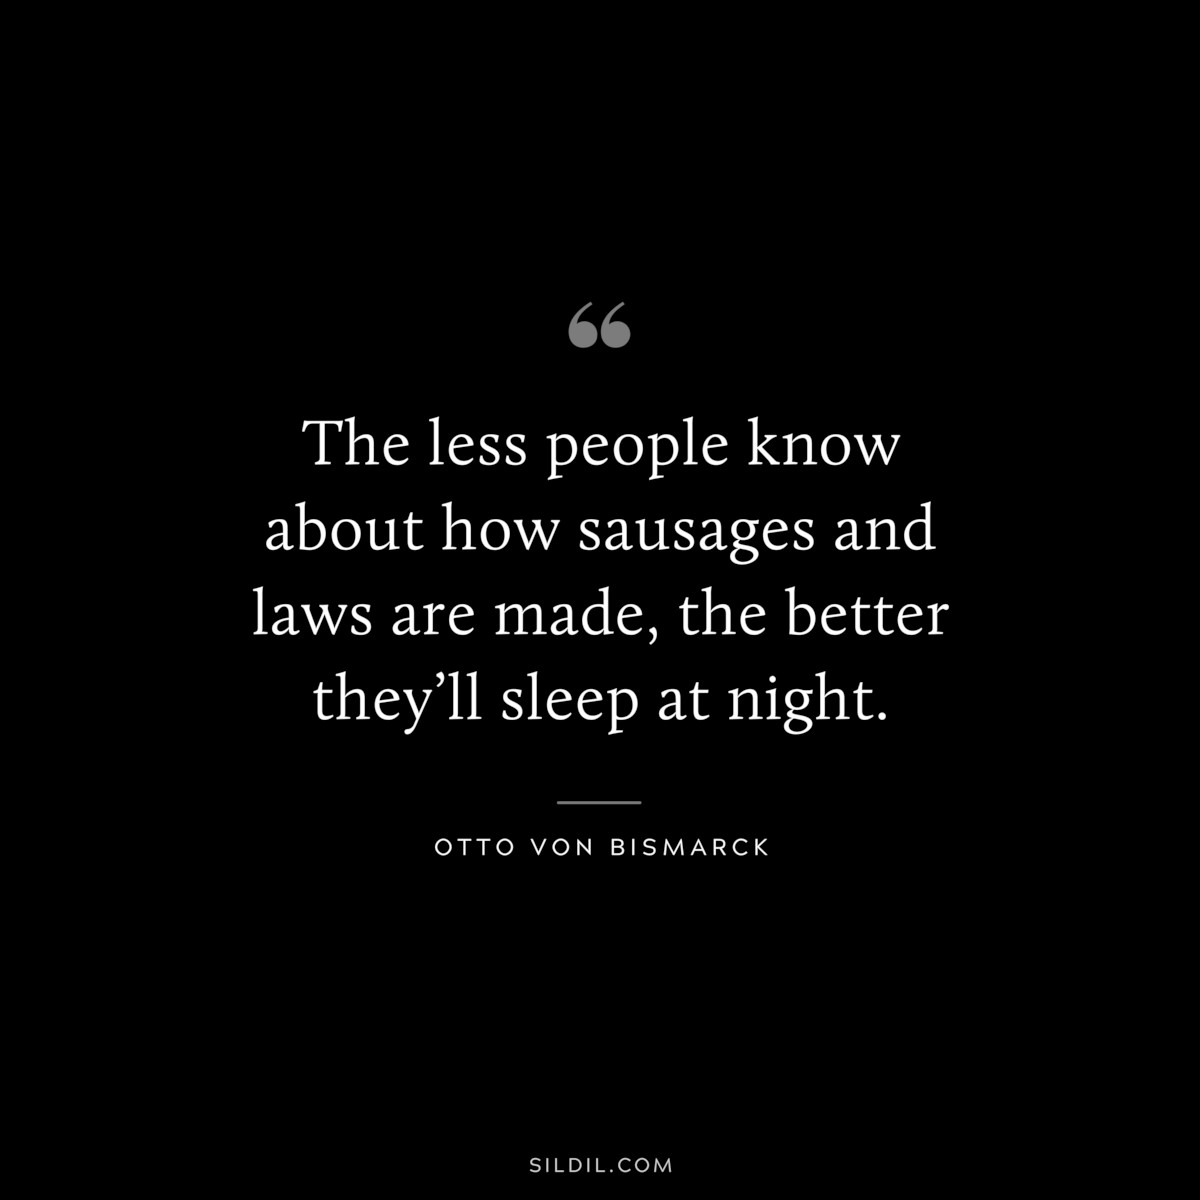 The less people know about how sausages and laws are made, the better they’ll sleep at night. ― Otto von Bismarck